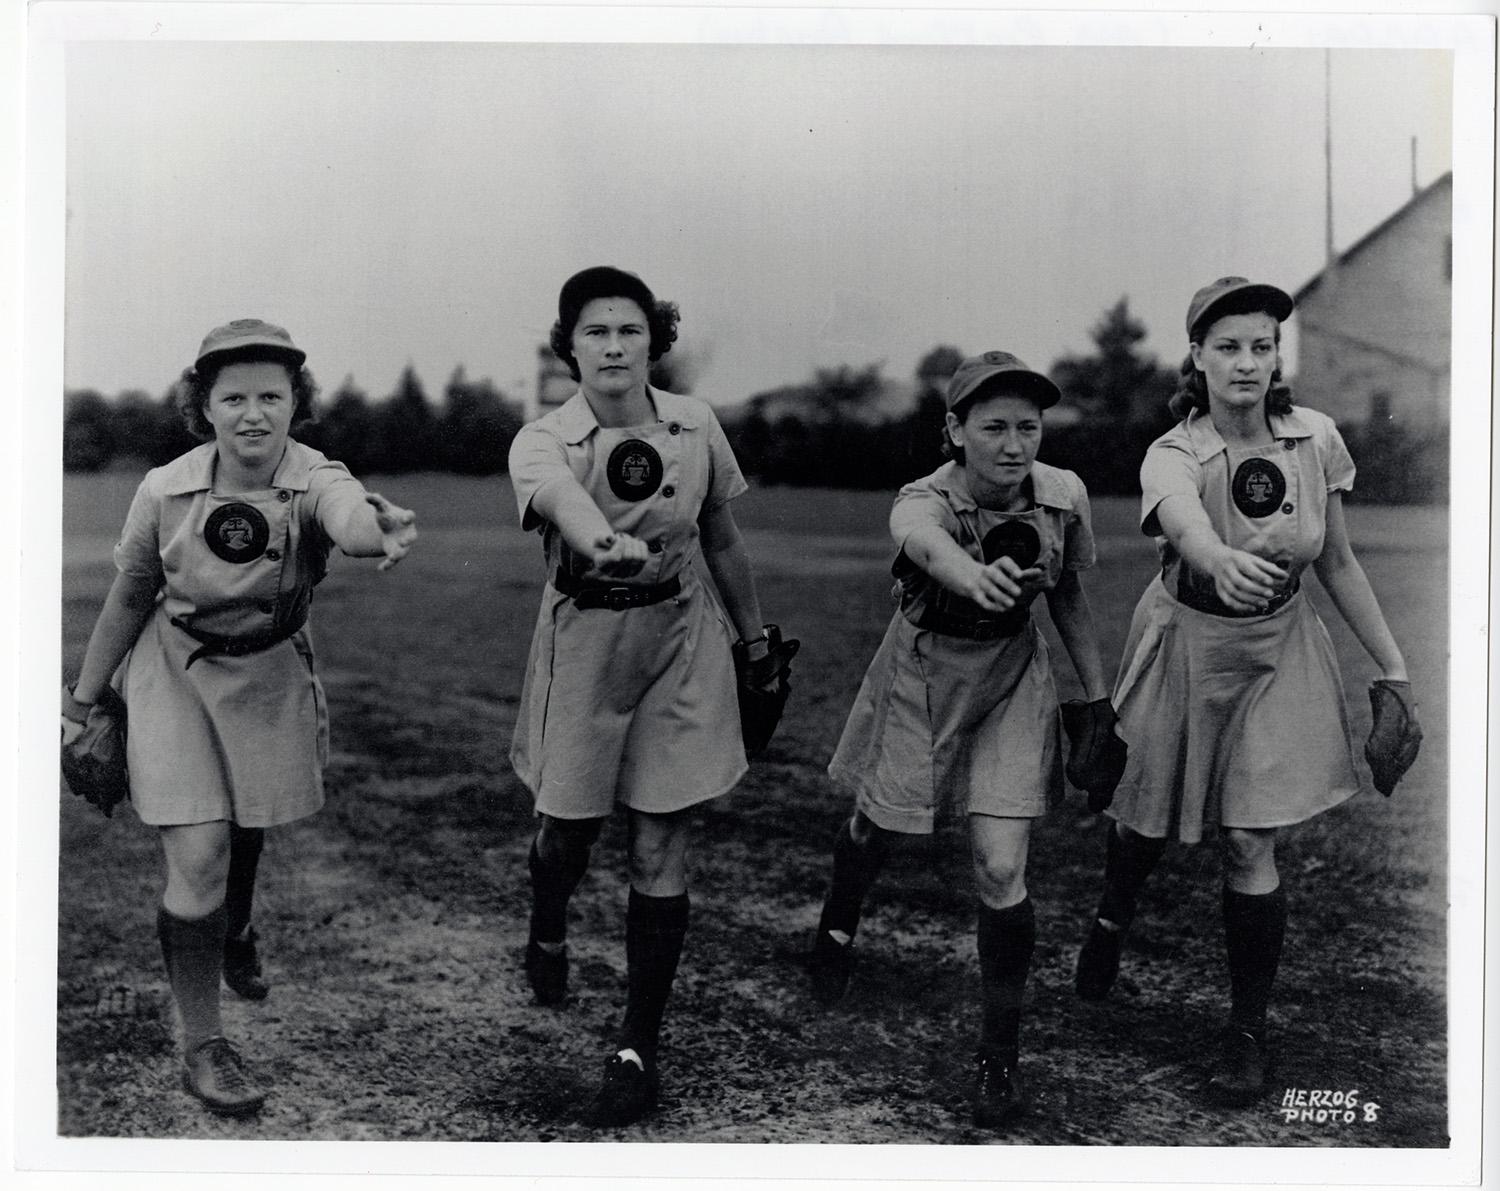 The Real Story Behind the Rockford Peaches From A League of Their